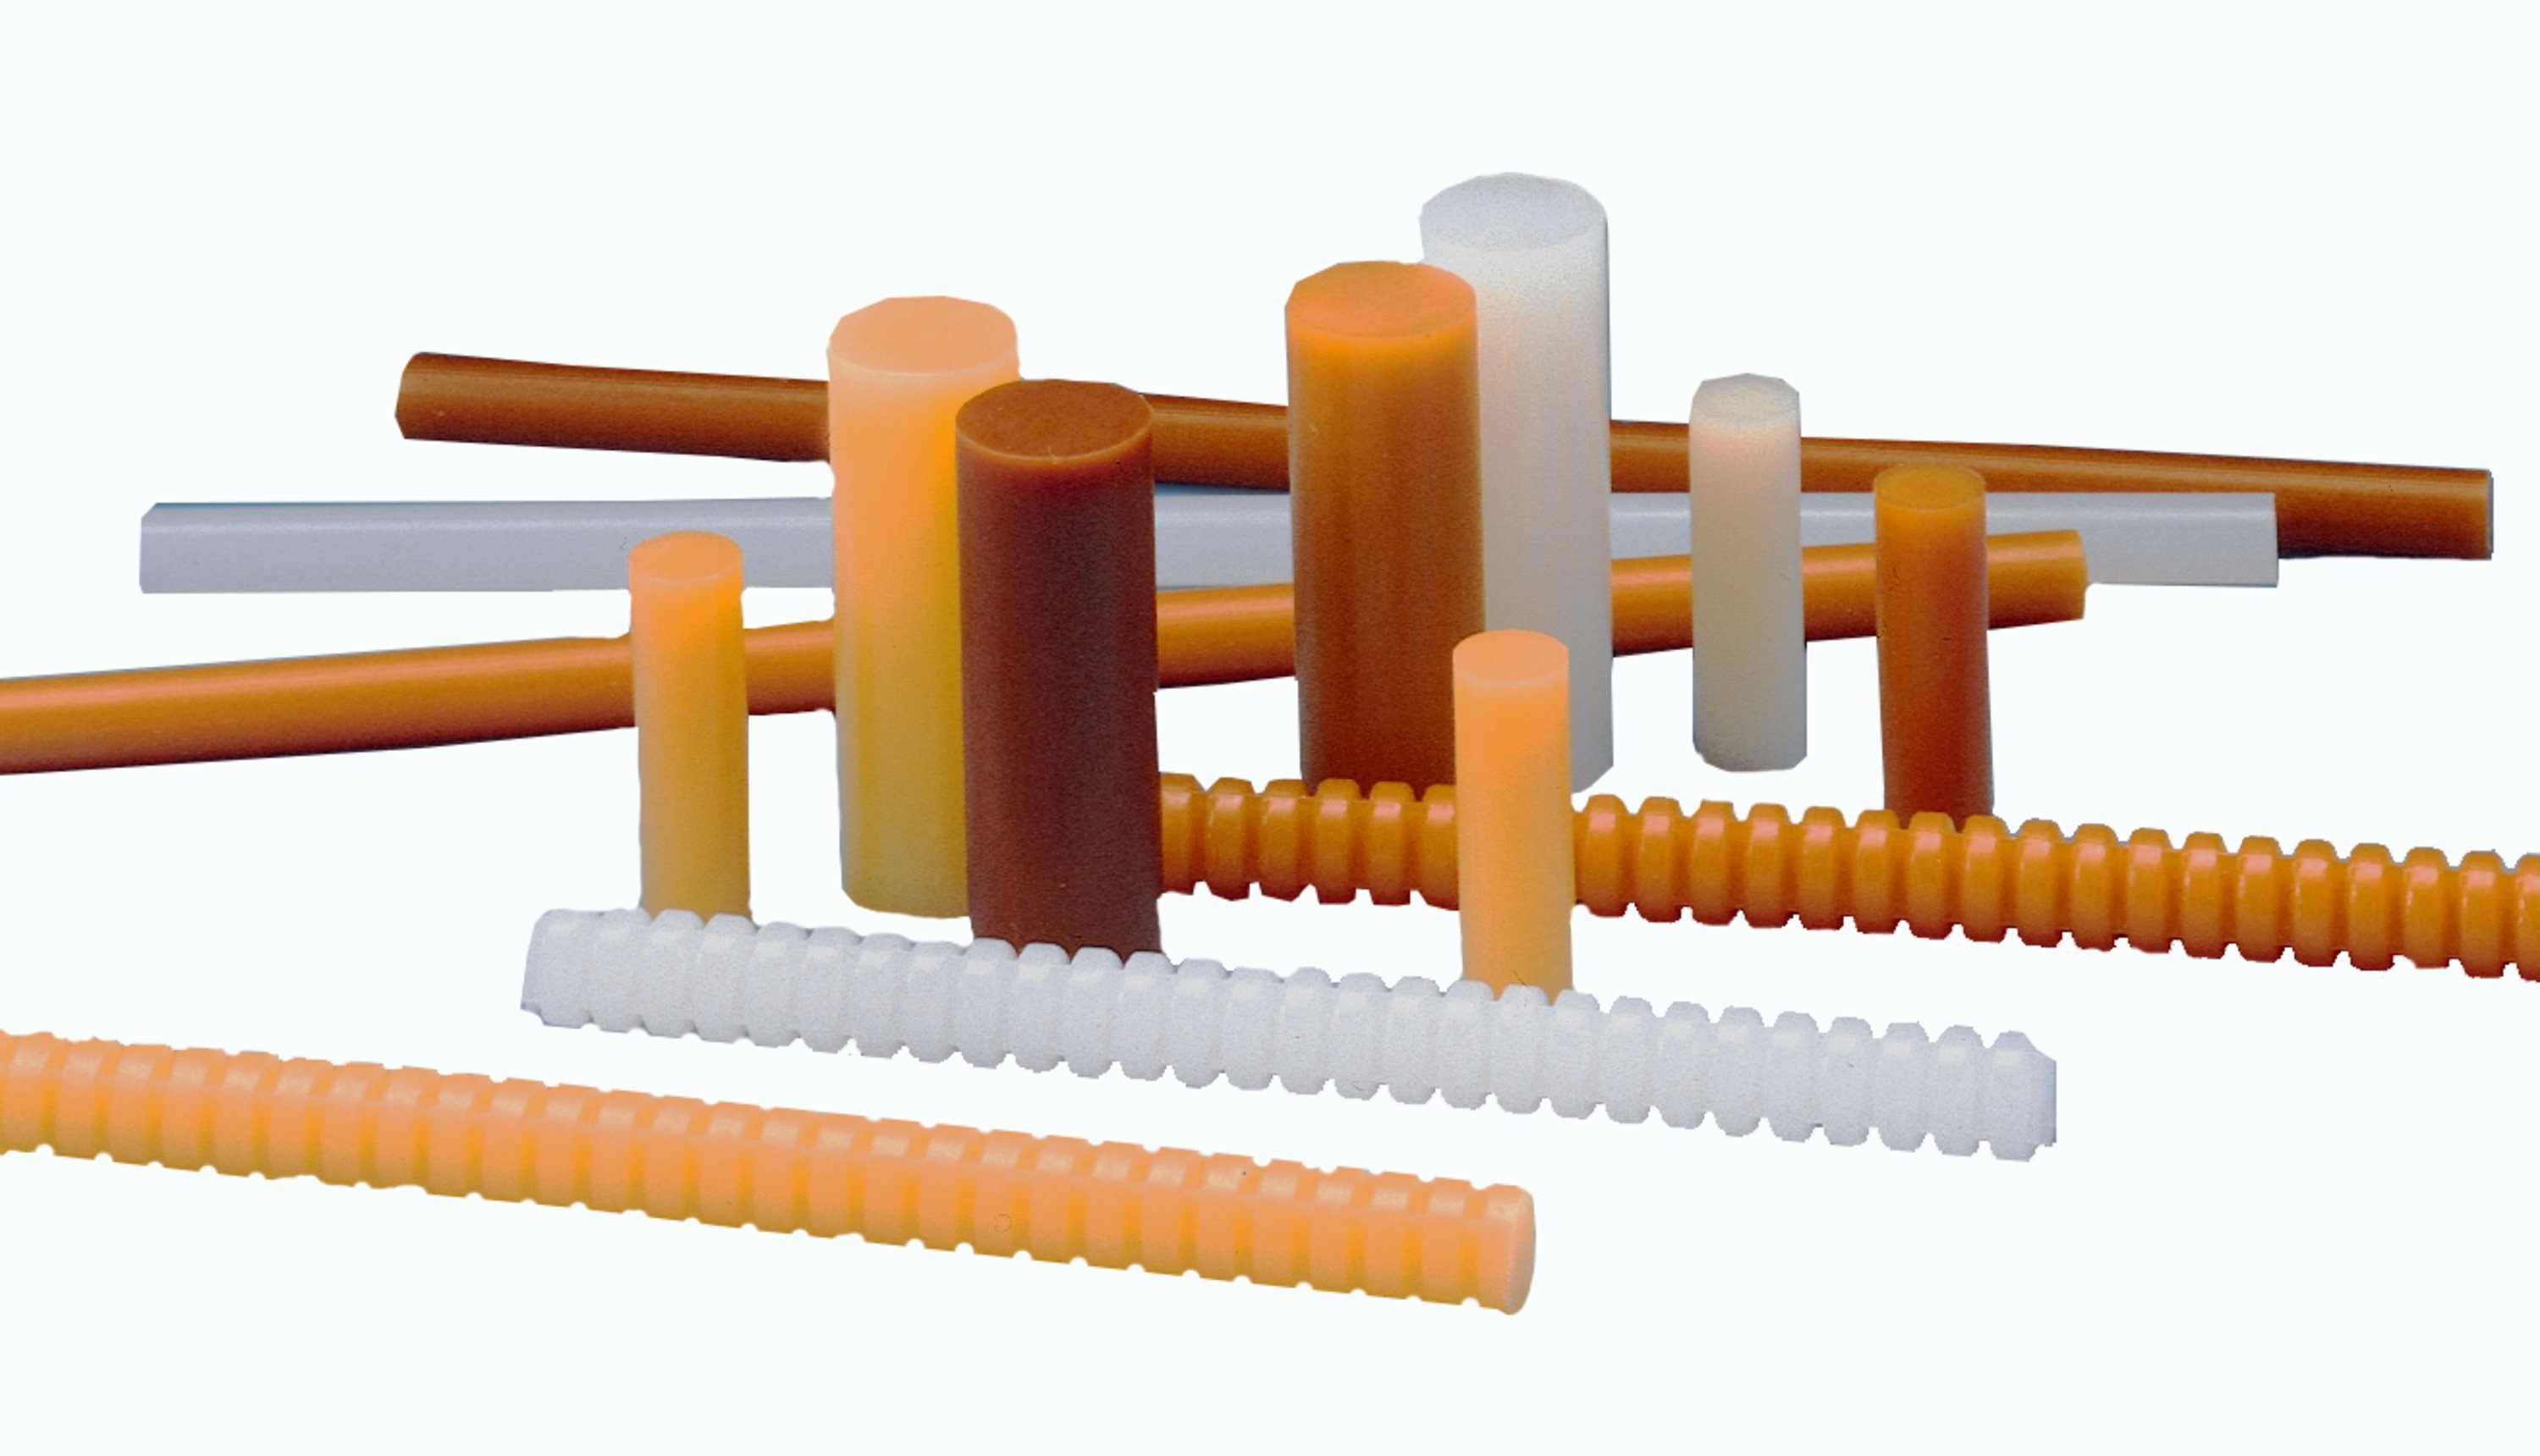 Hot melt adhesives, also known as glue sticks, are liquefied thermoplastic adhesives available in both low and high-temperature versions.